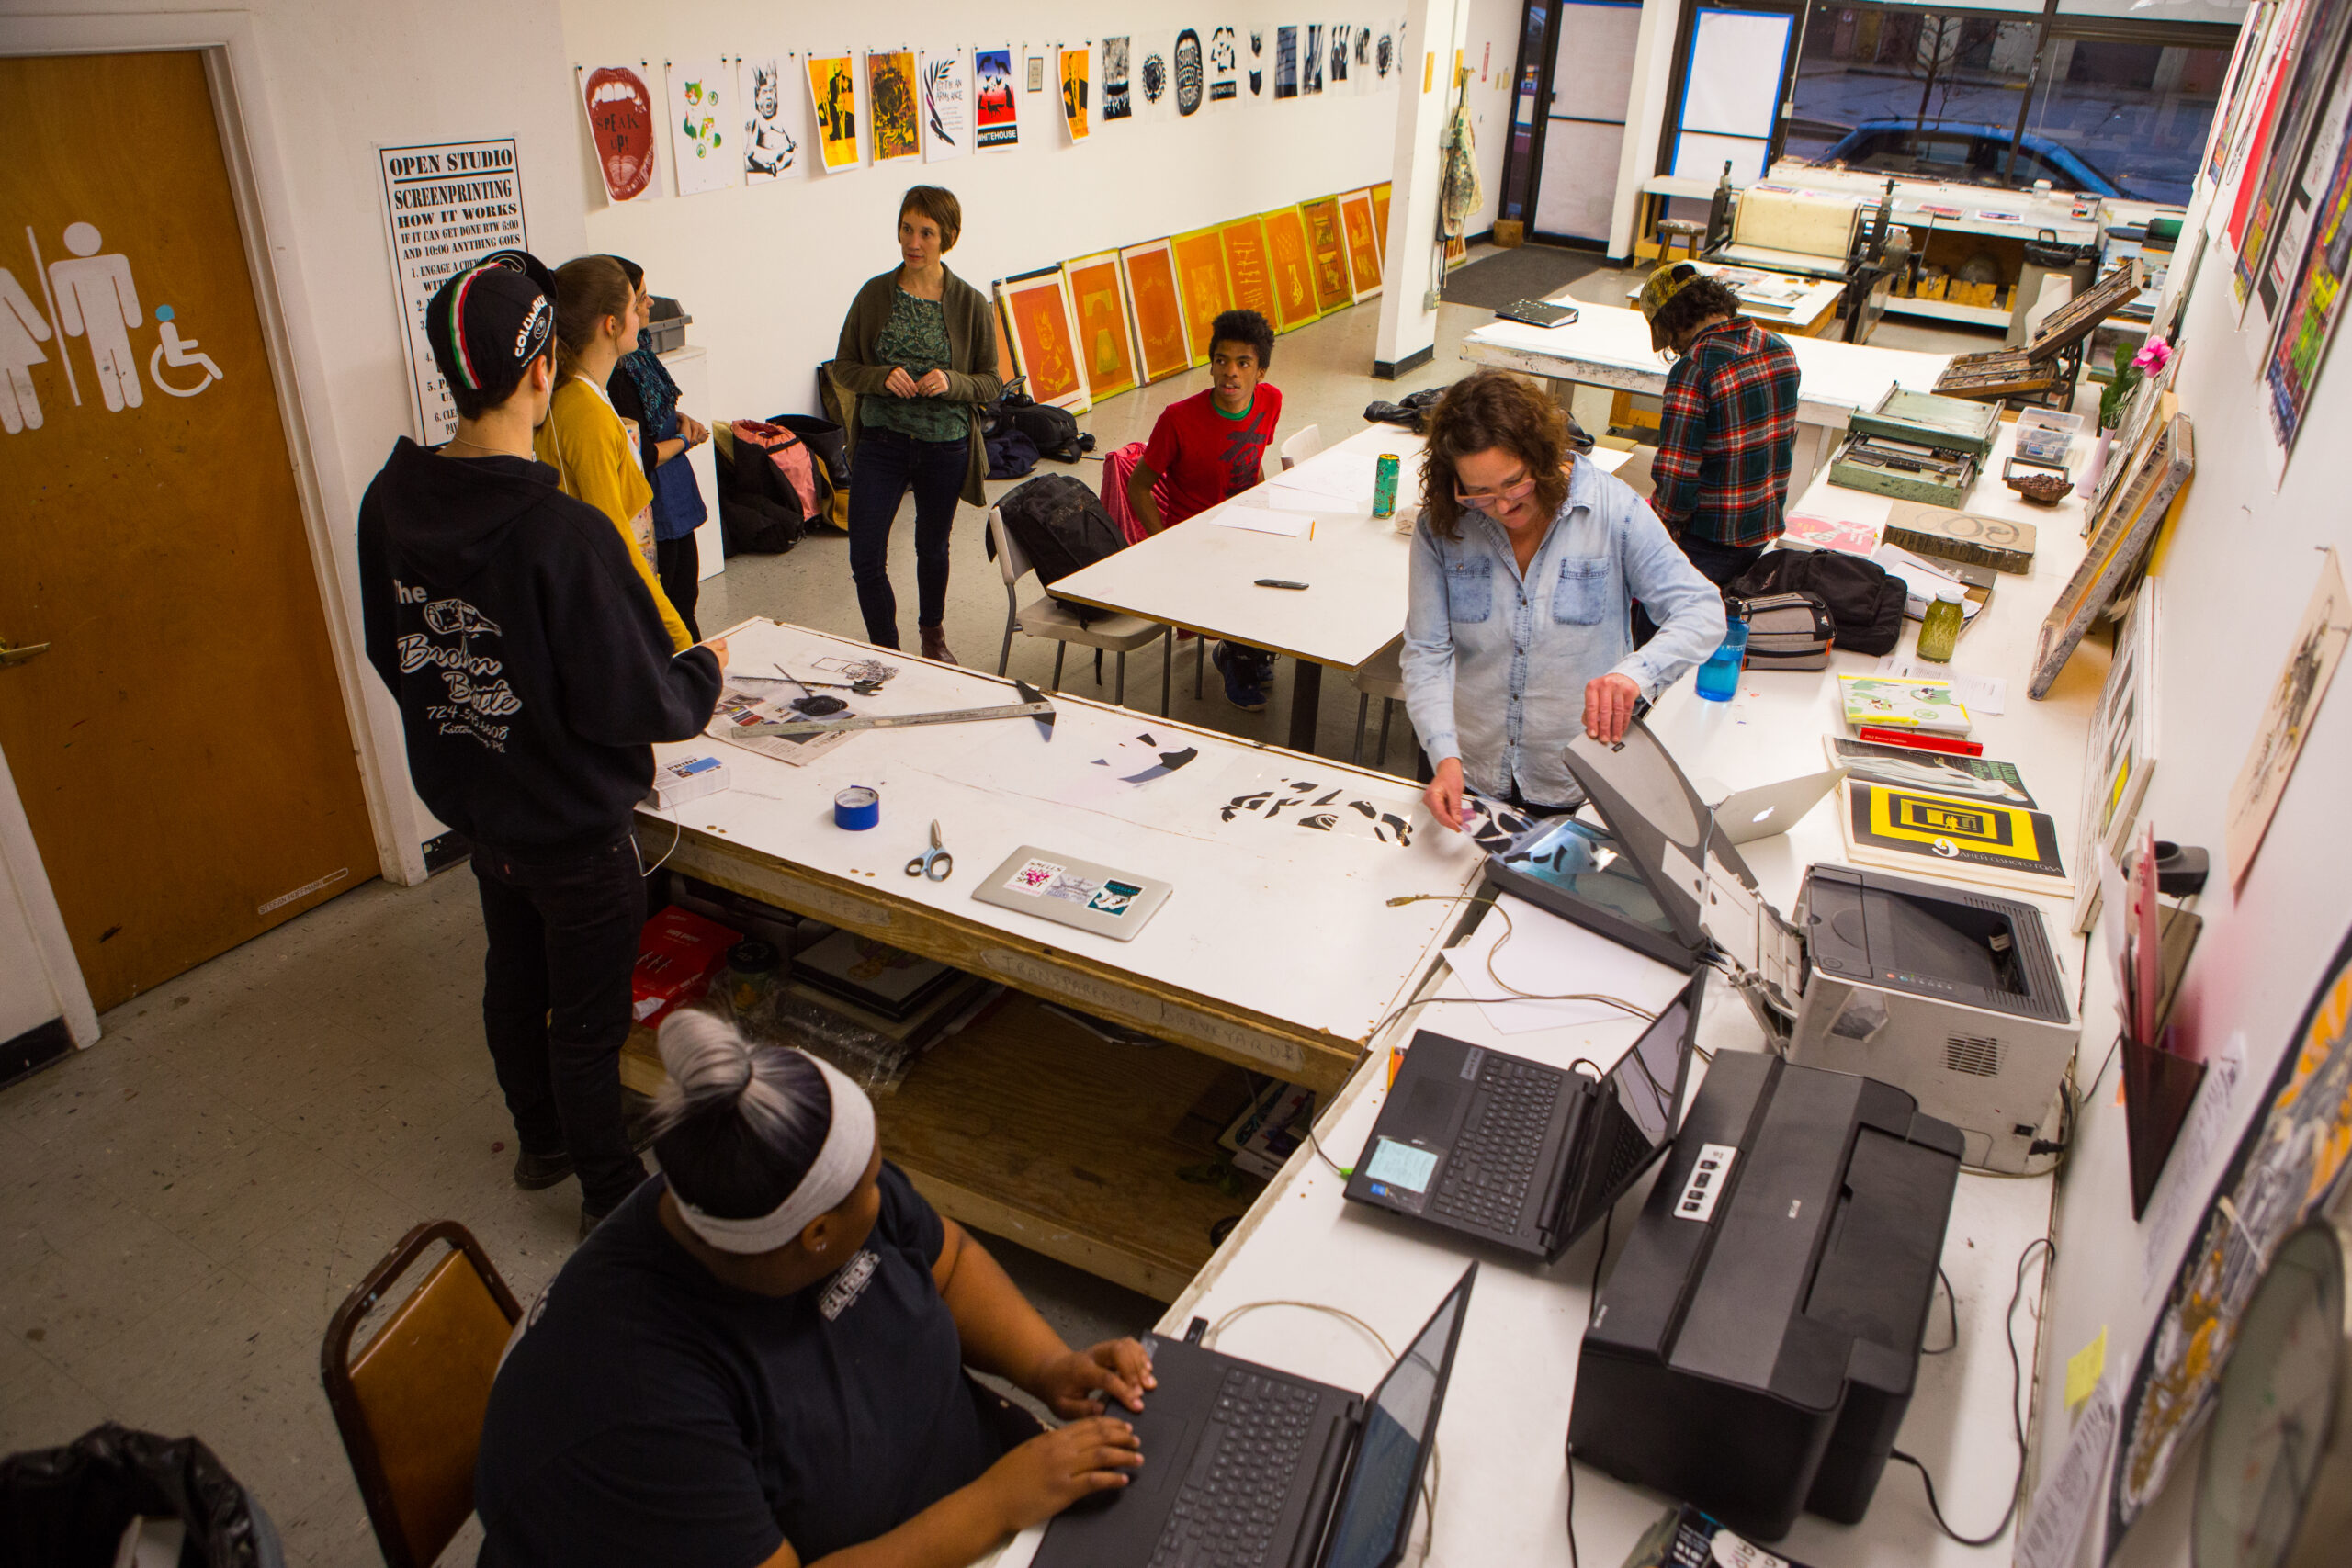 A studio full of young people working on various phases of the printing process. A young woman types on a laptop, a woman arranges papers in a scanner, and several teens are gathered around counters and tables in the room talking.